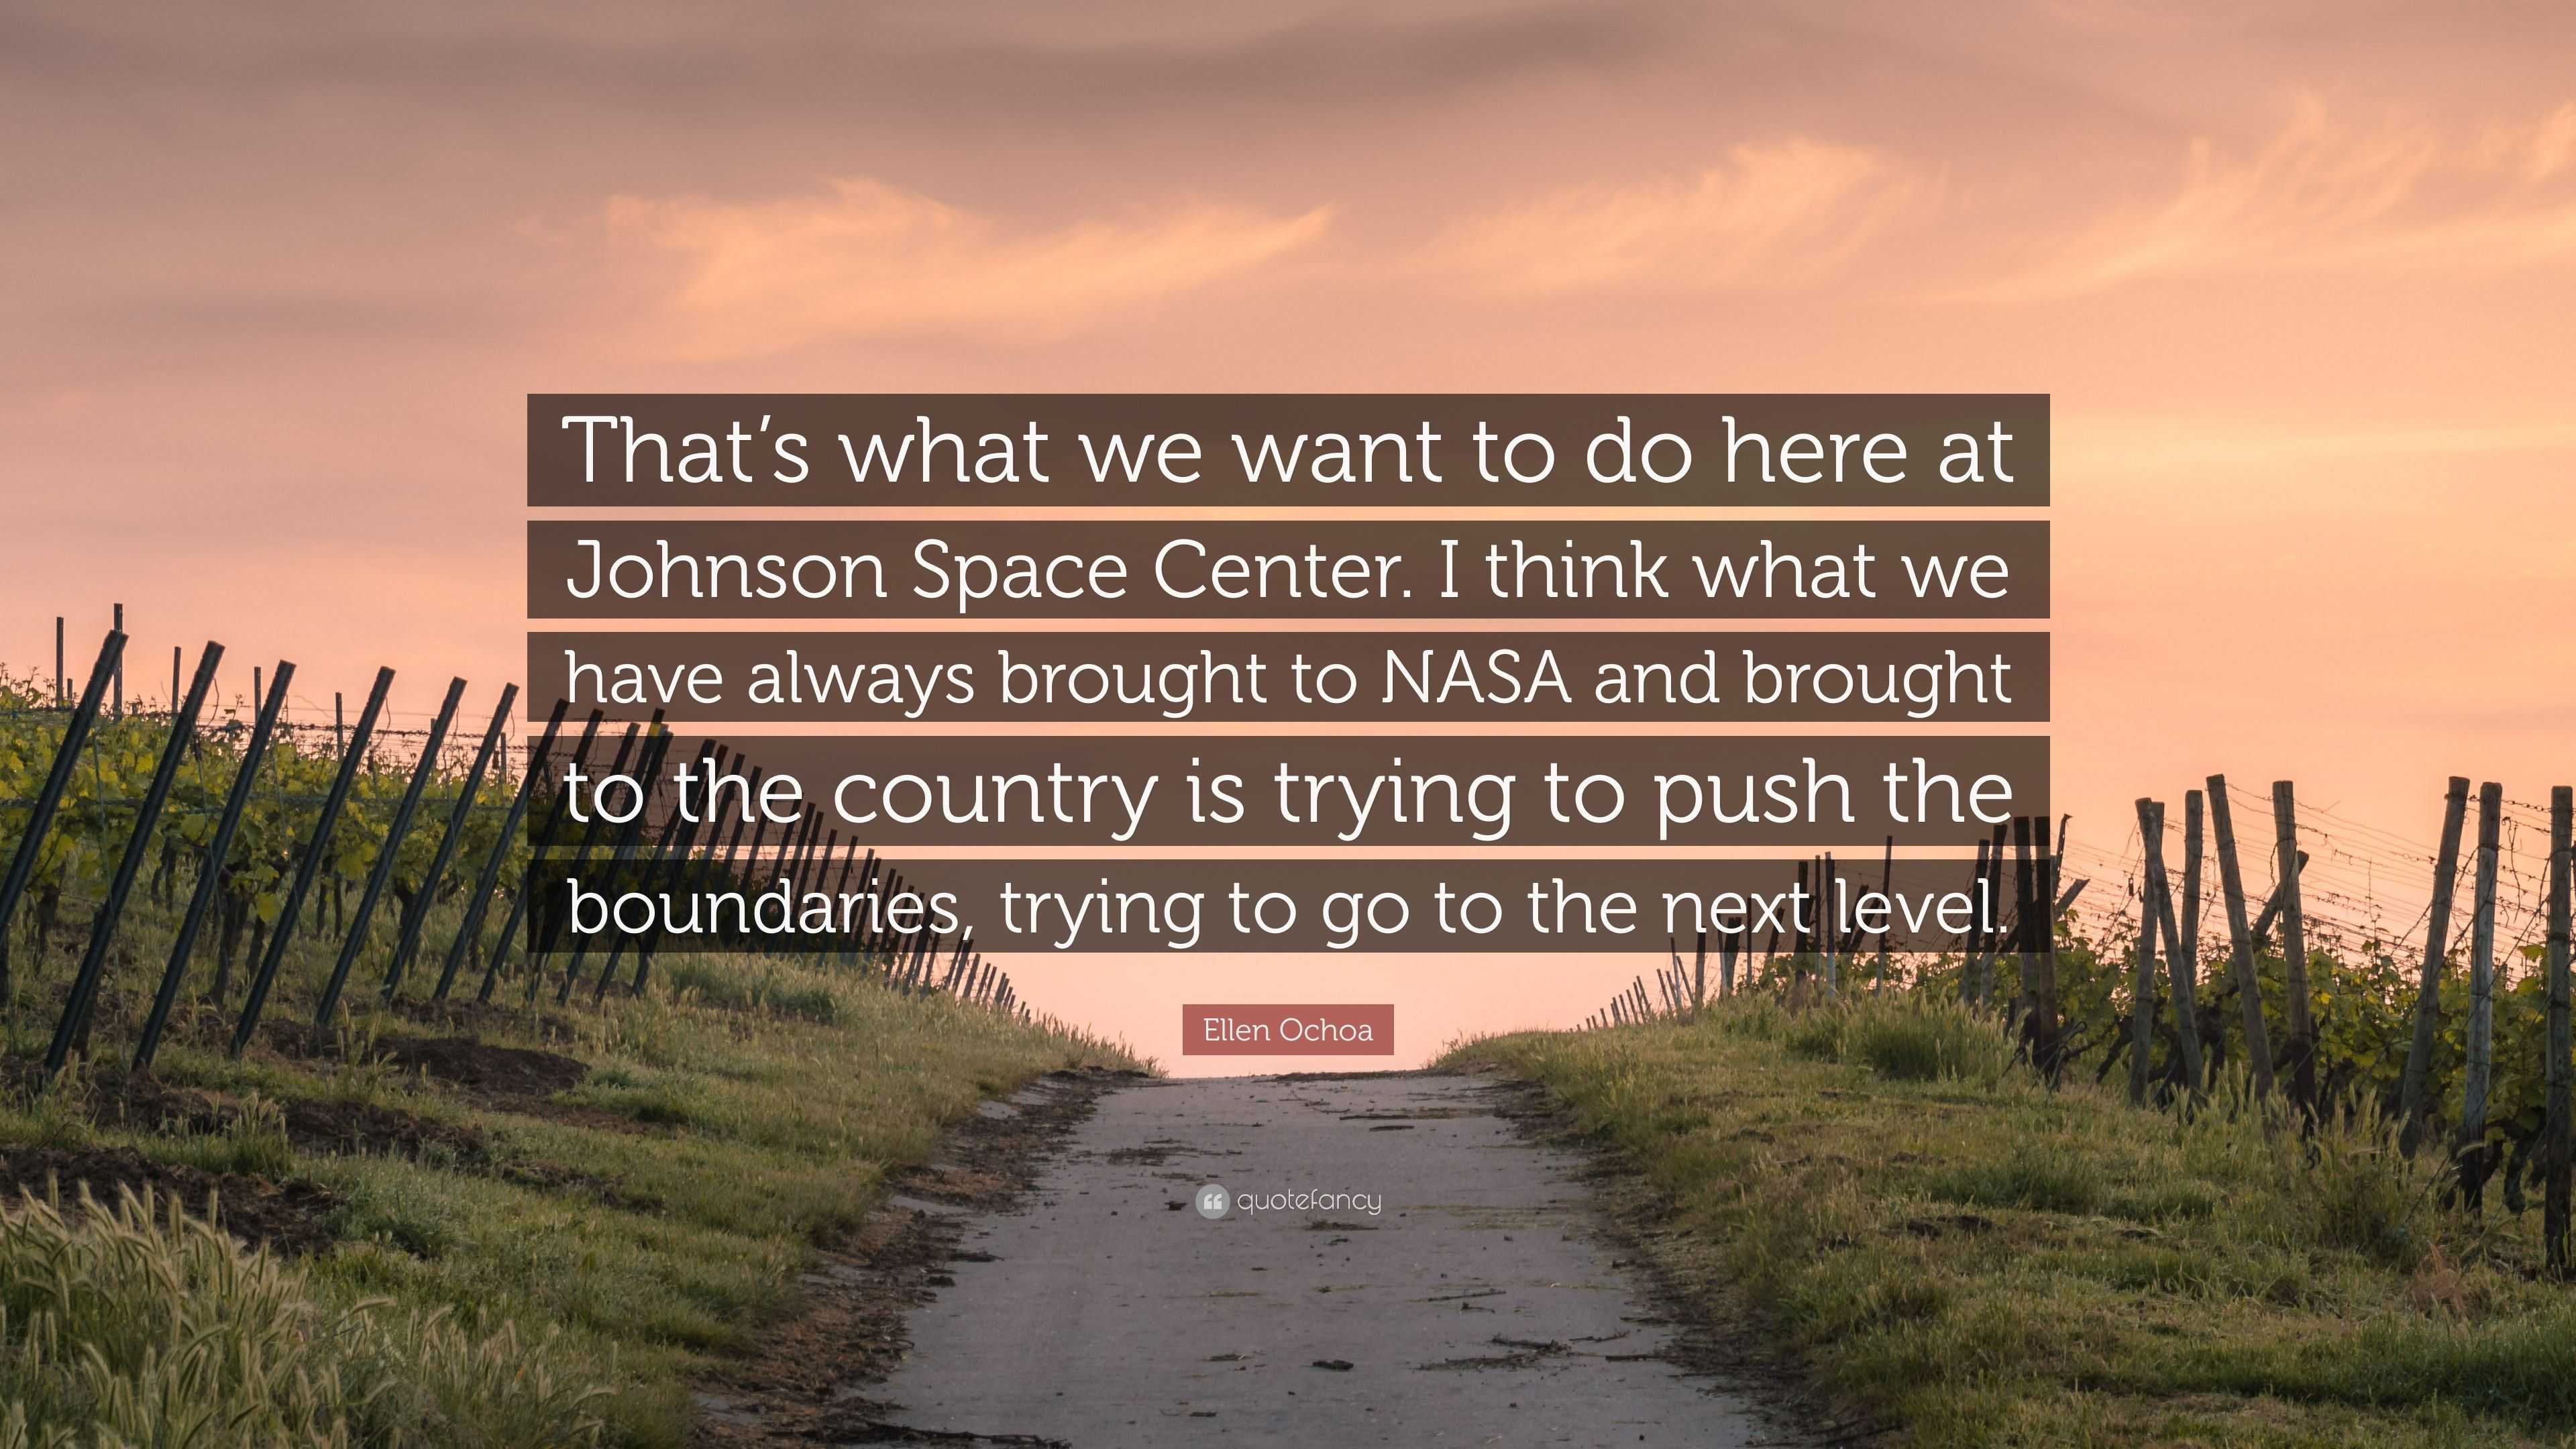 Ellen Ochoa Quote: "That's what we want to do here at Johnson Space Center. I think what we have ...